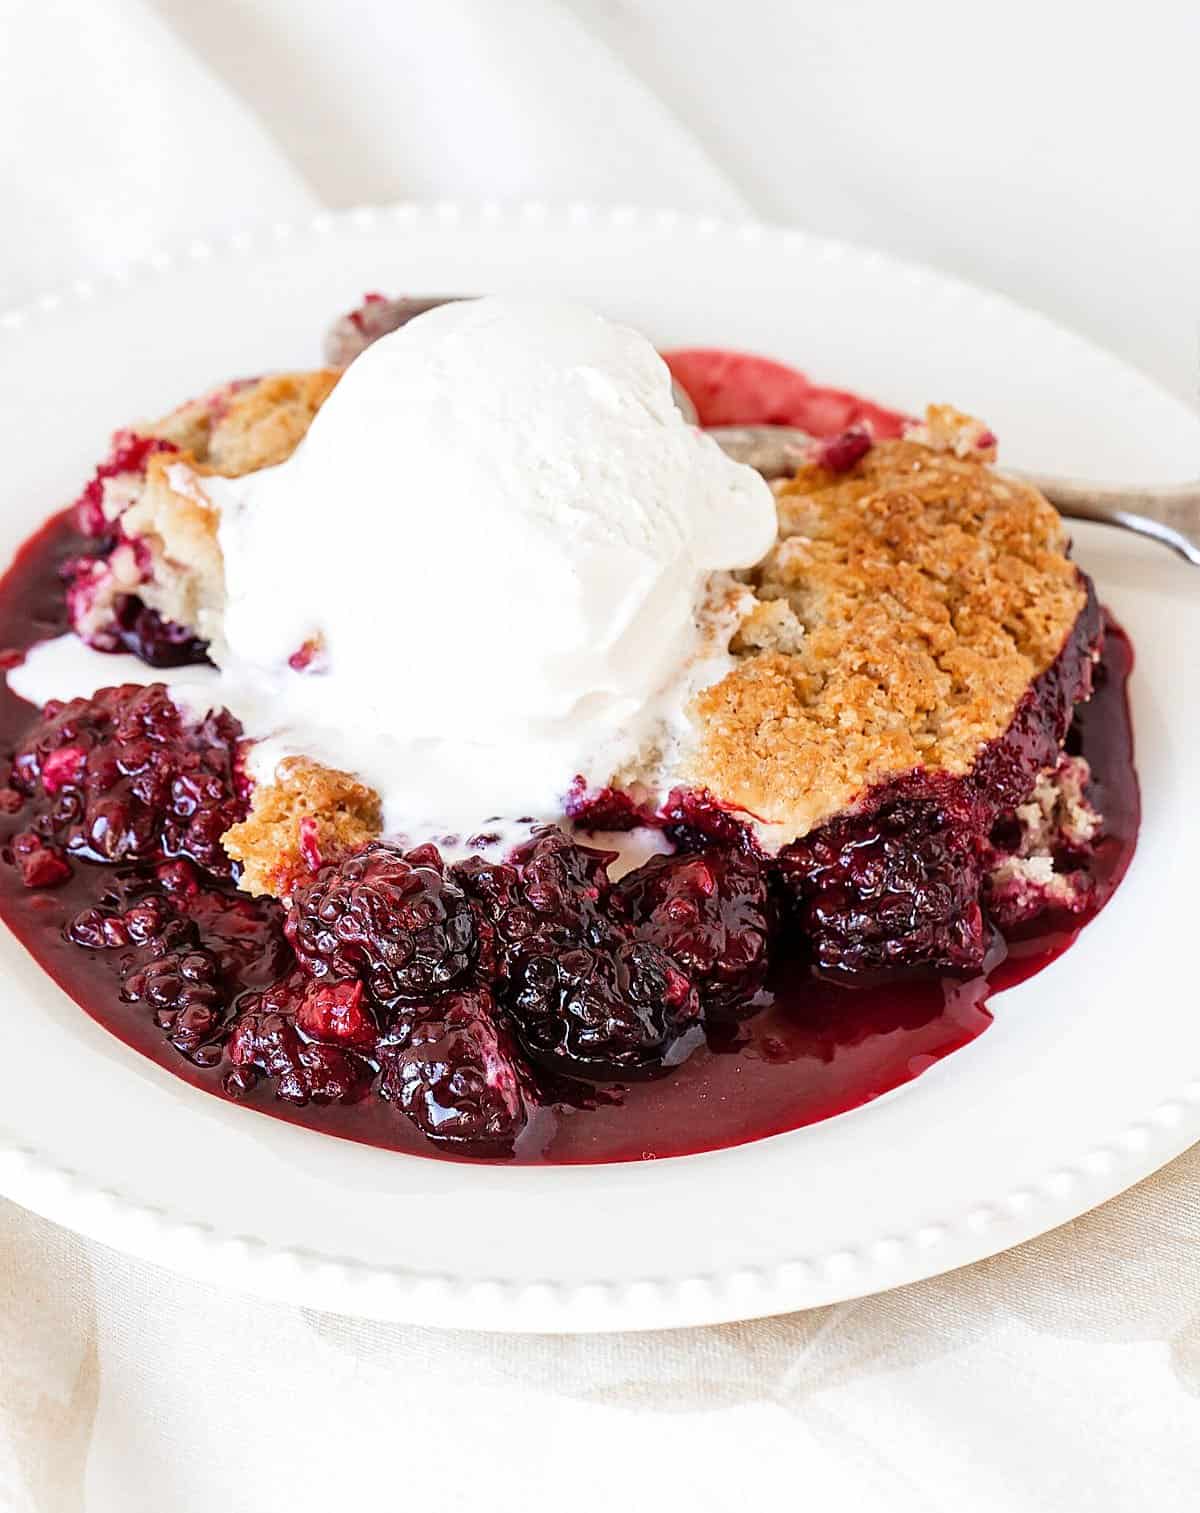 White plate with blackberry cobbler serving with ice cream, white background